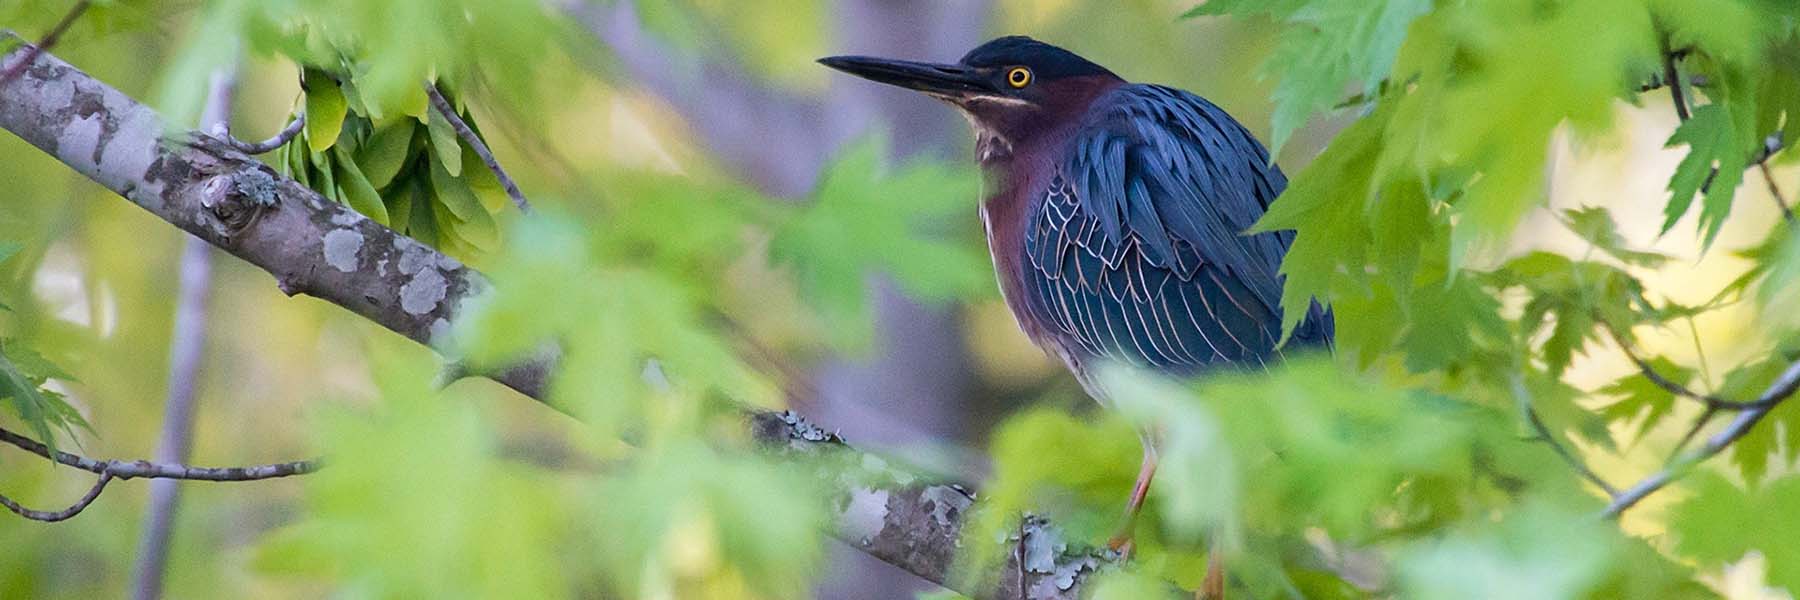 A Green Heron perches on the branch of a maple tree.